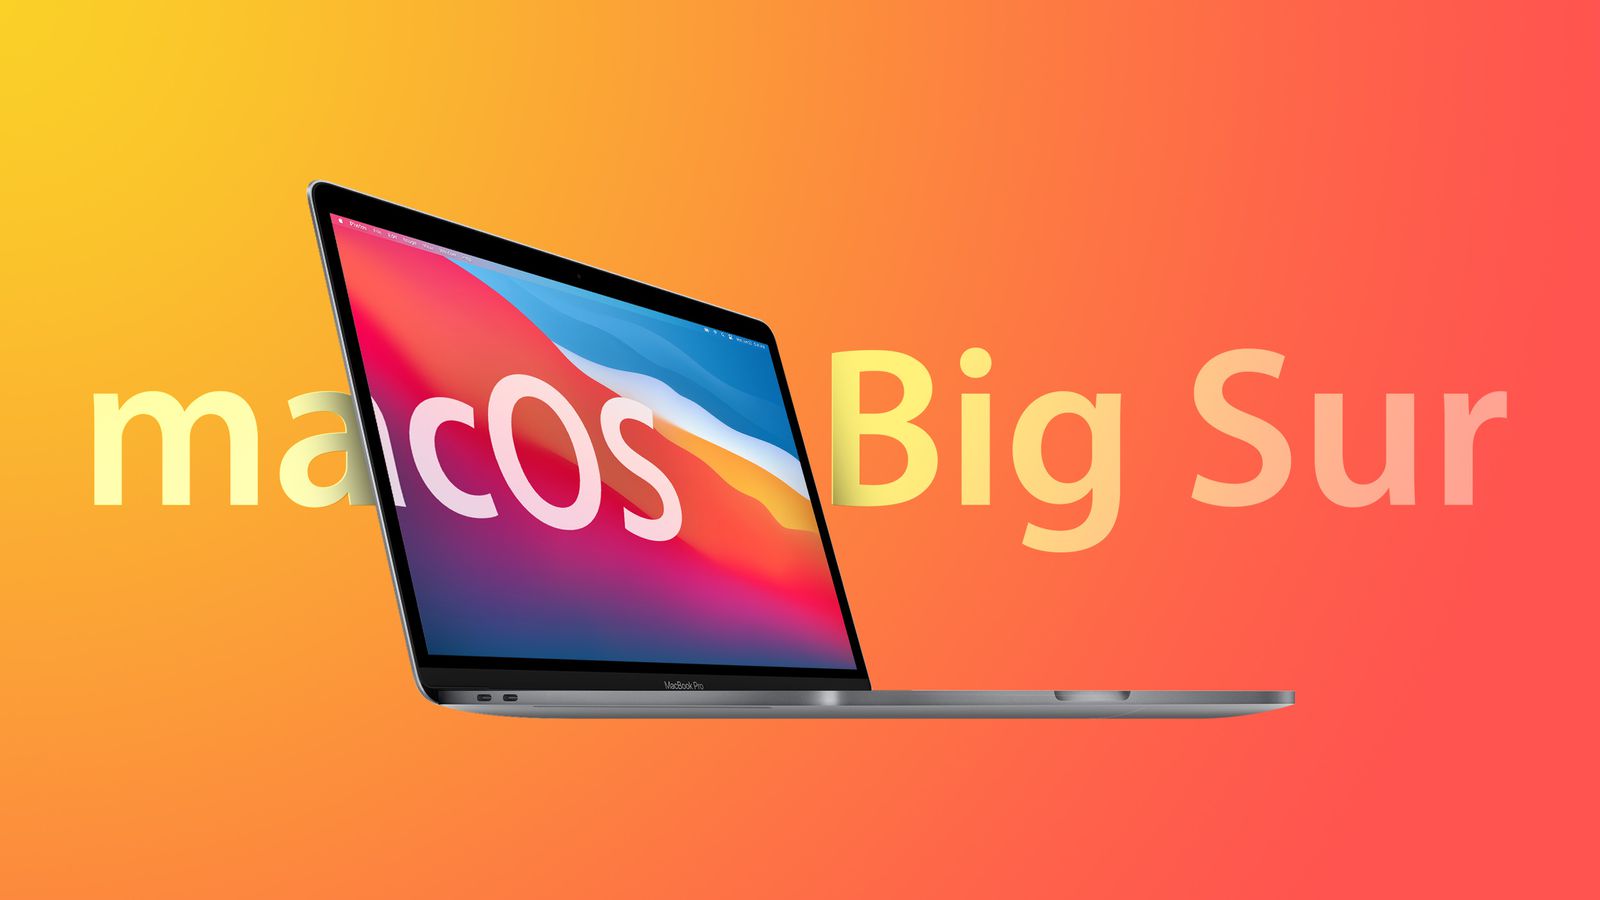 Apple introduces macOS Big Sur with a beautiful new design - Apple